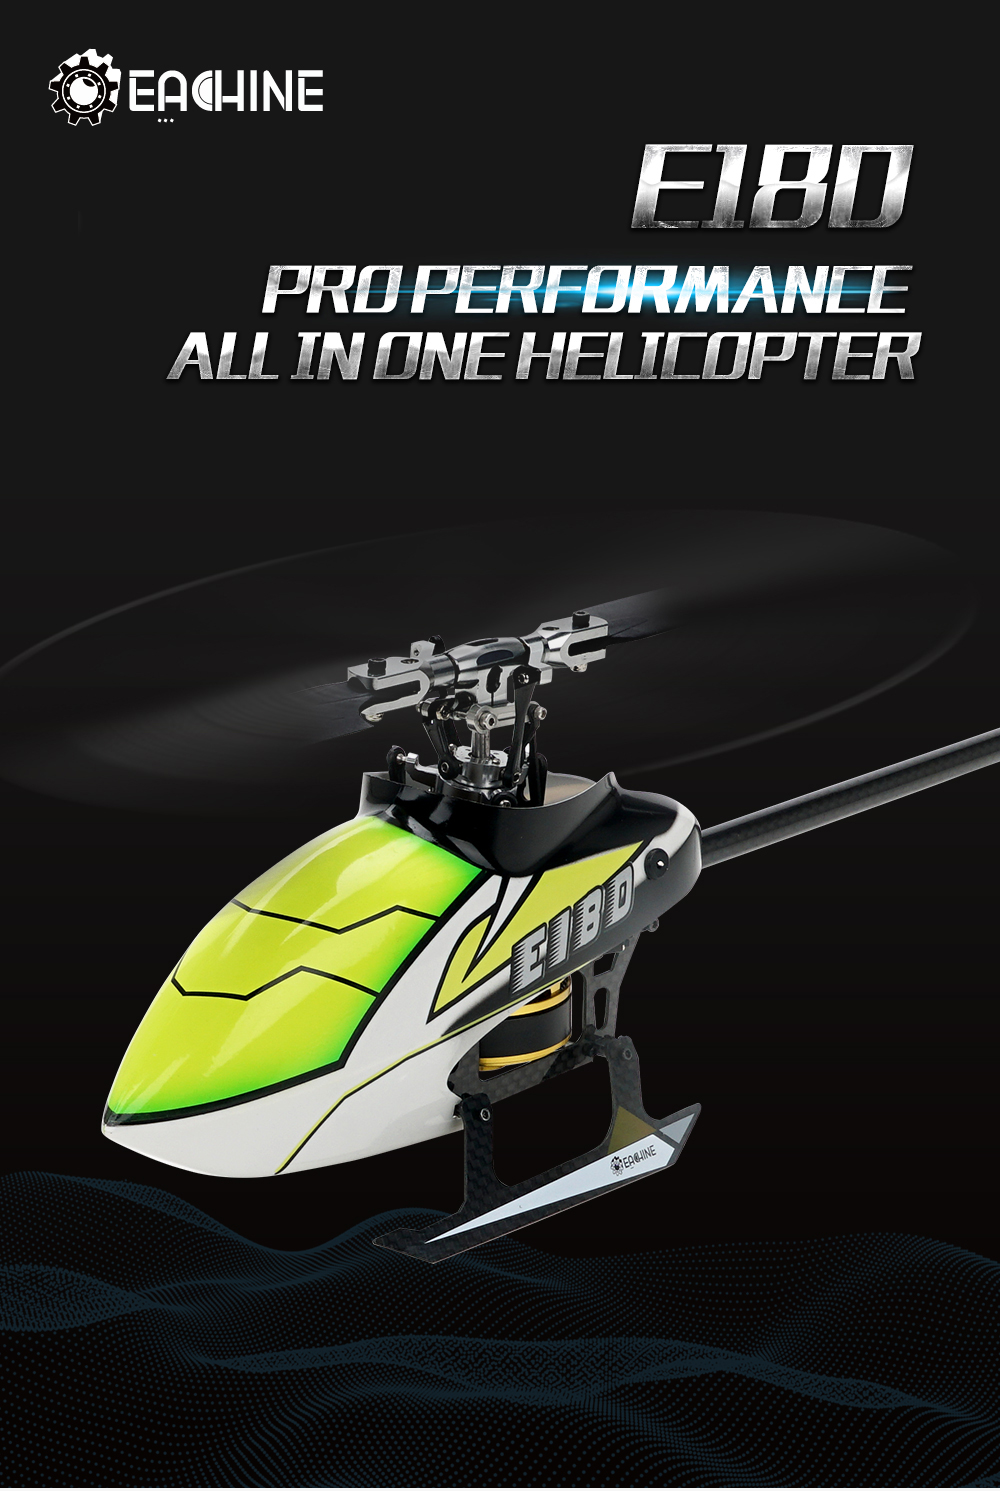 Eachine-E180-6CH-3D6G-System-Dual-Brushless-Direct-Drive-Motor-Flybarless-RC-Helicopter-BNF-Compatib-1810193-1